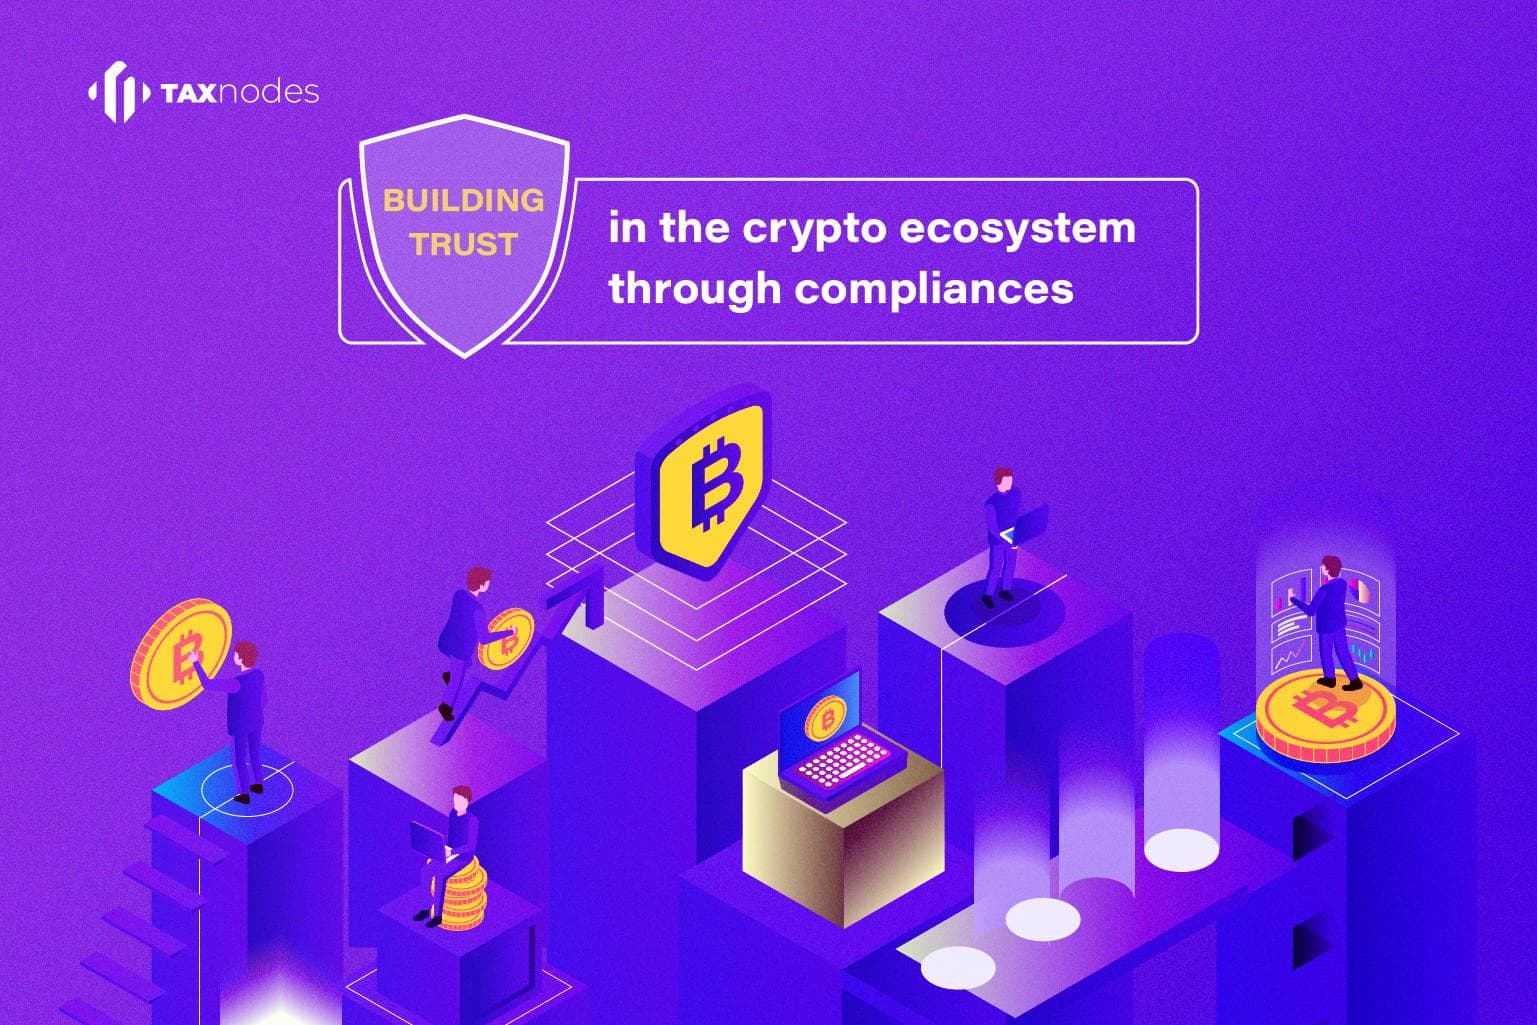 Building trust in the crypto ecosystem through compliances